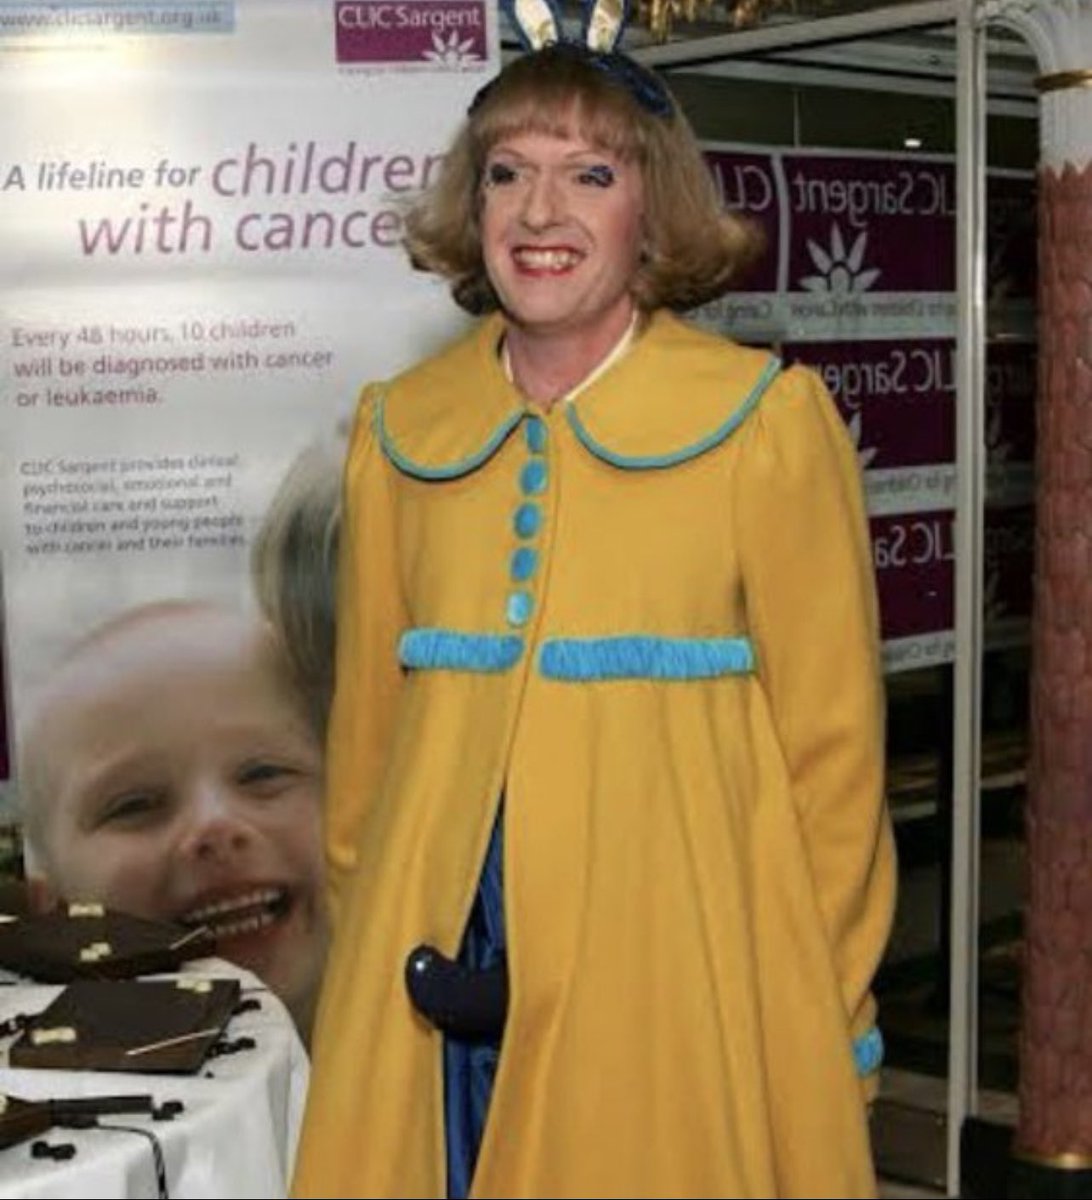 So Sir Grayson Perry aka @Alan_Measles turns up to a children’s charity event wearing a dildo. Why?